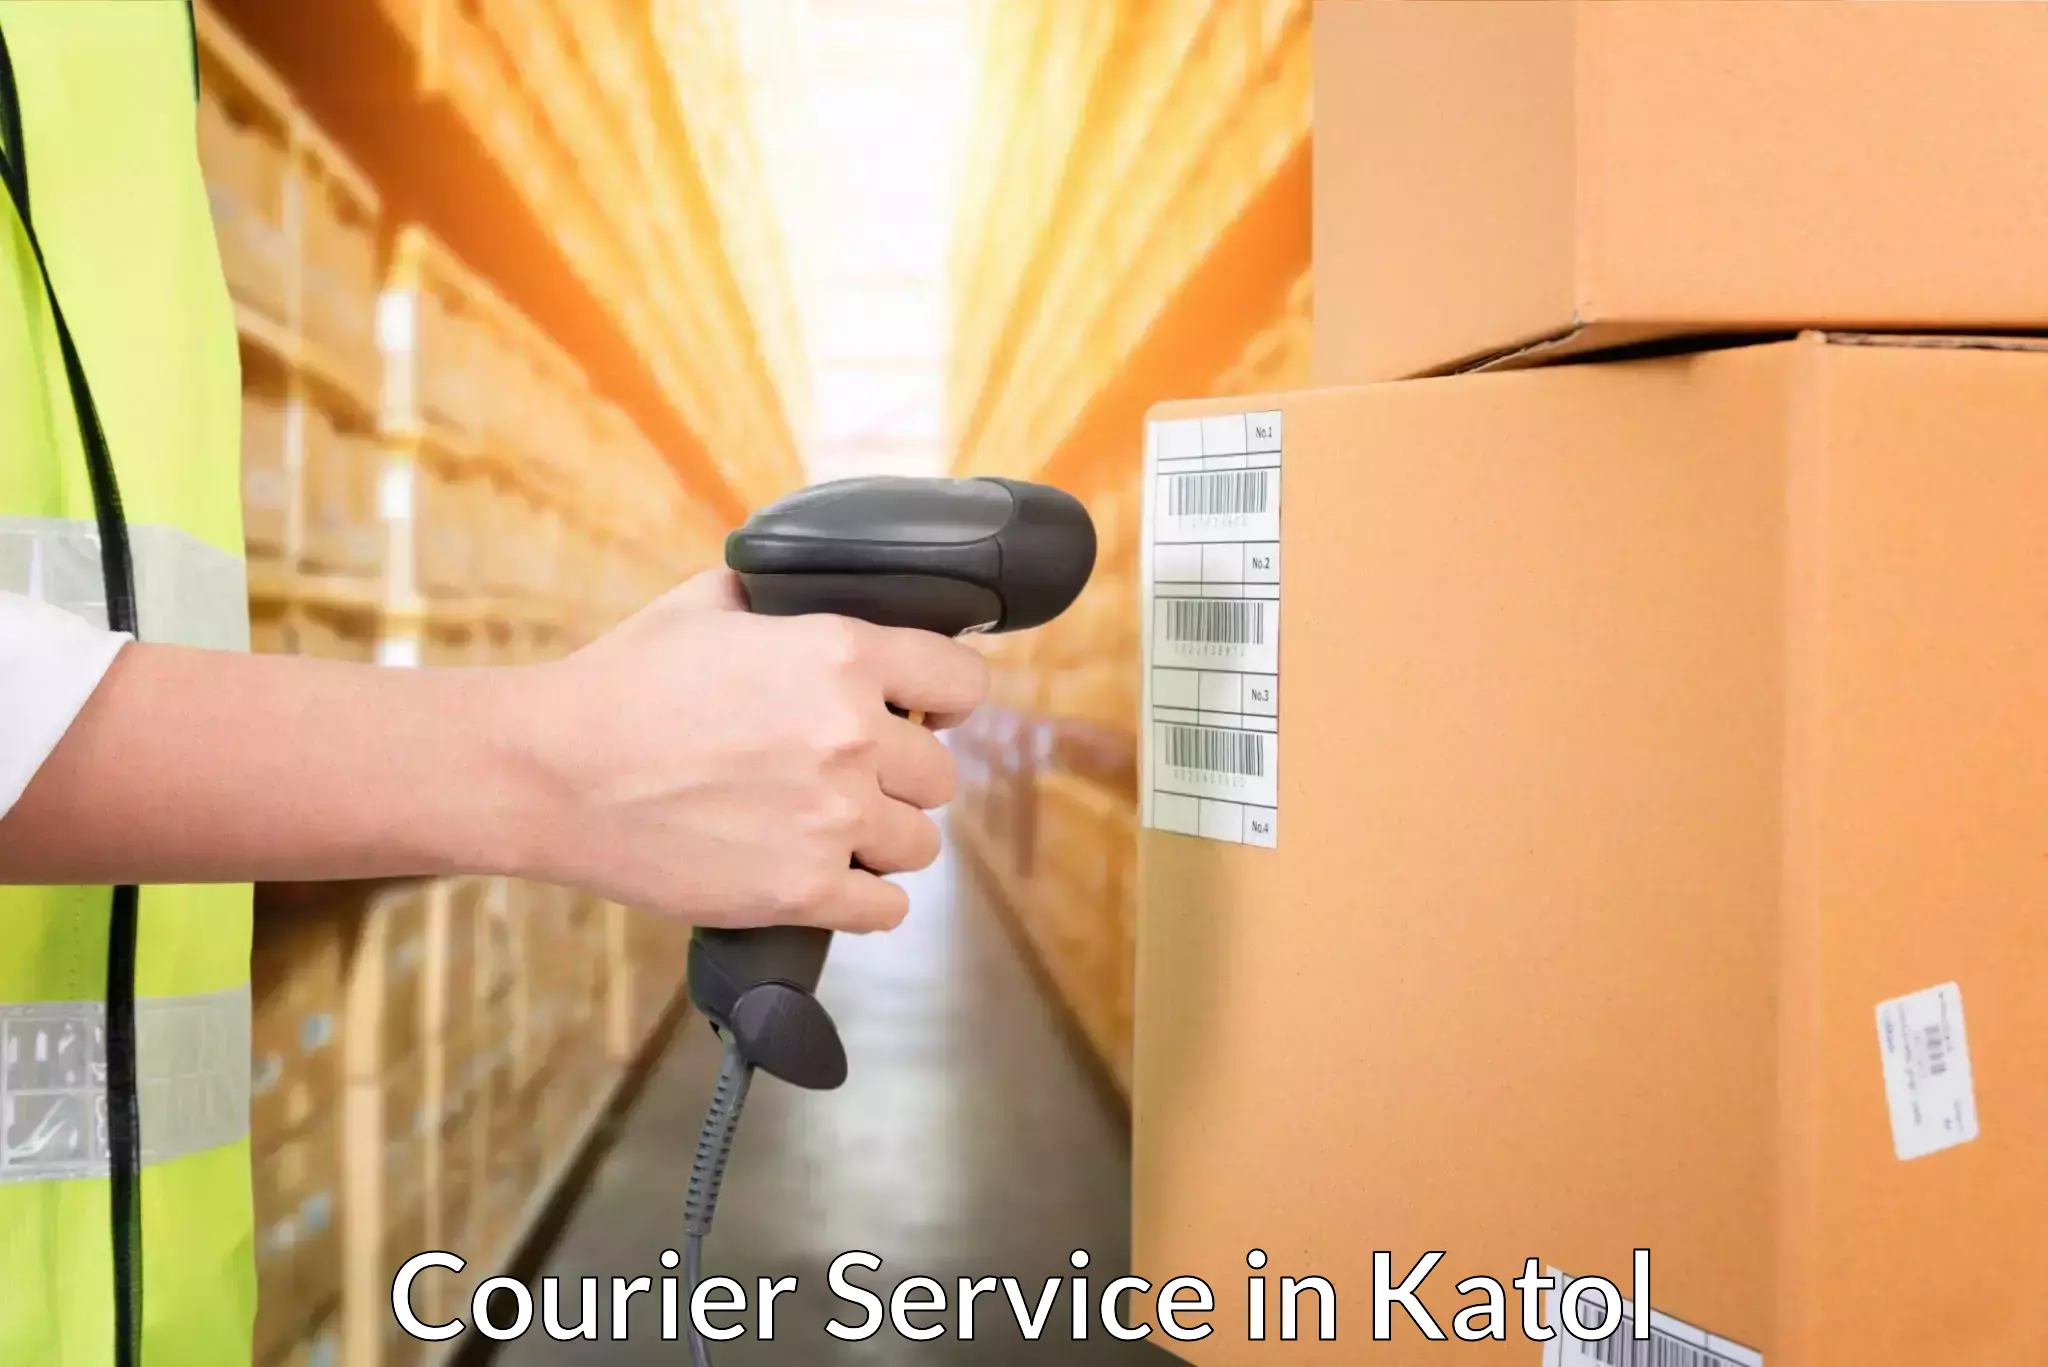 Same-day delivery solutions in Katol